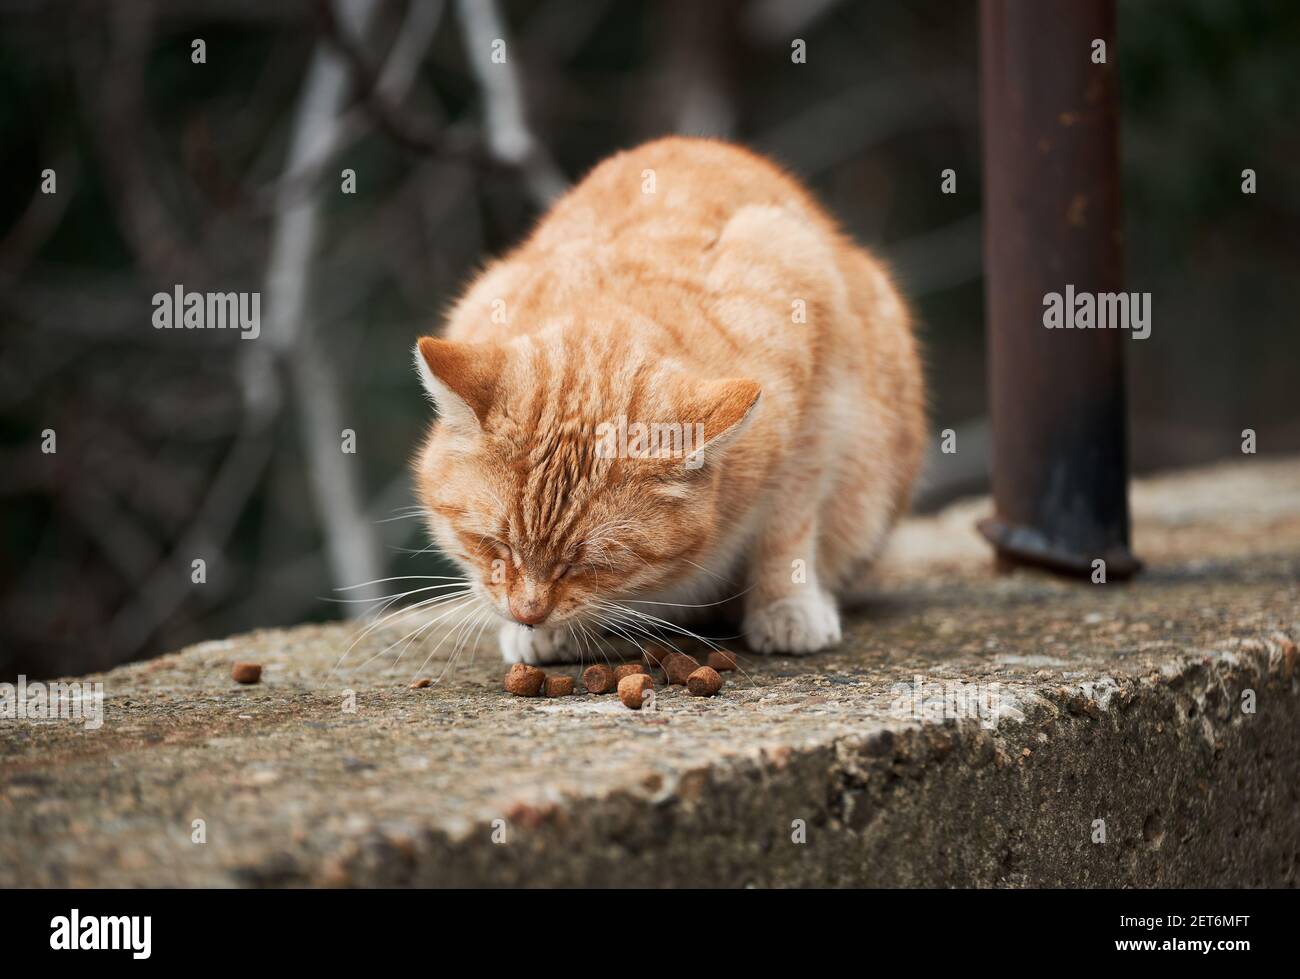 Striped street ginger cat eats dry food. Abandoned animal lives on street and looks for food. Alone red kitten. Stock Photo